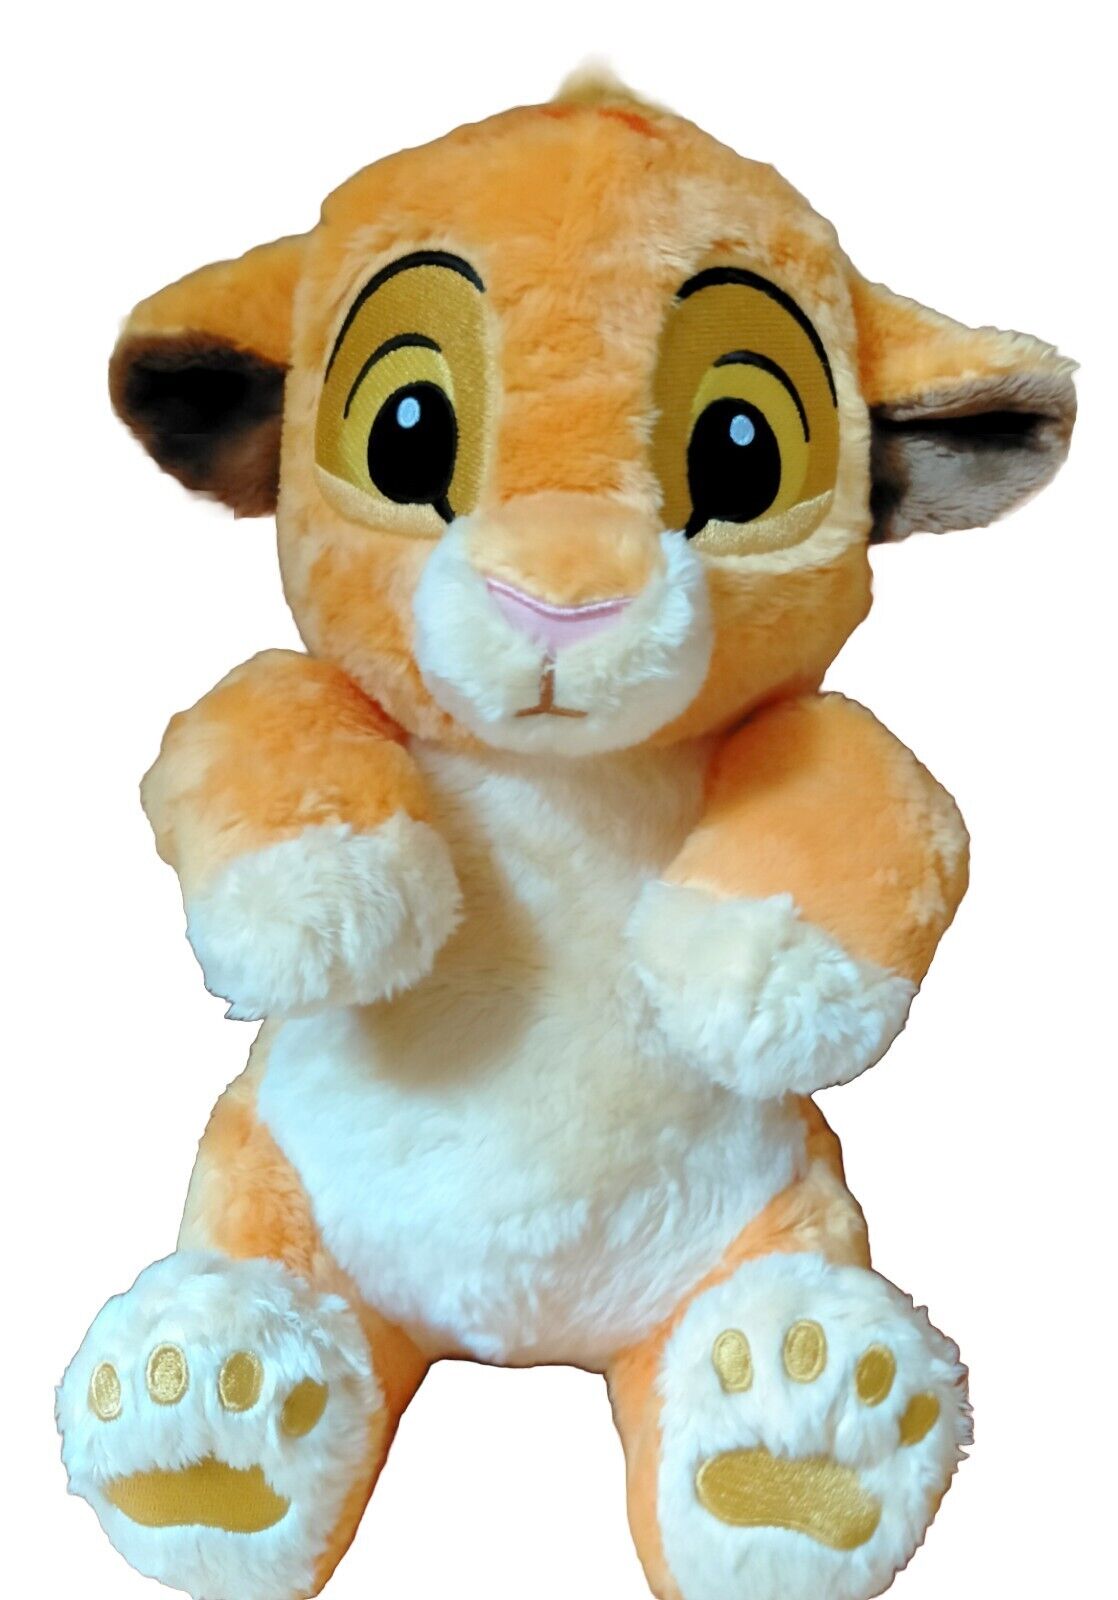 Adorable Baby Simba The Lion King  Plush Toy Disney Japan Approx. 10.4 Inches 